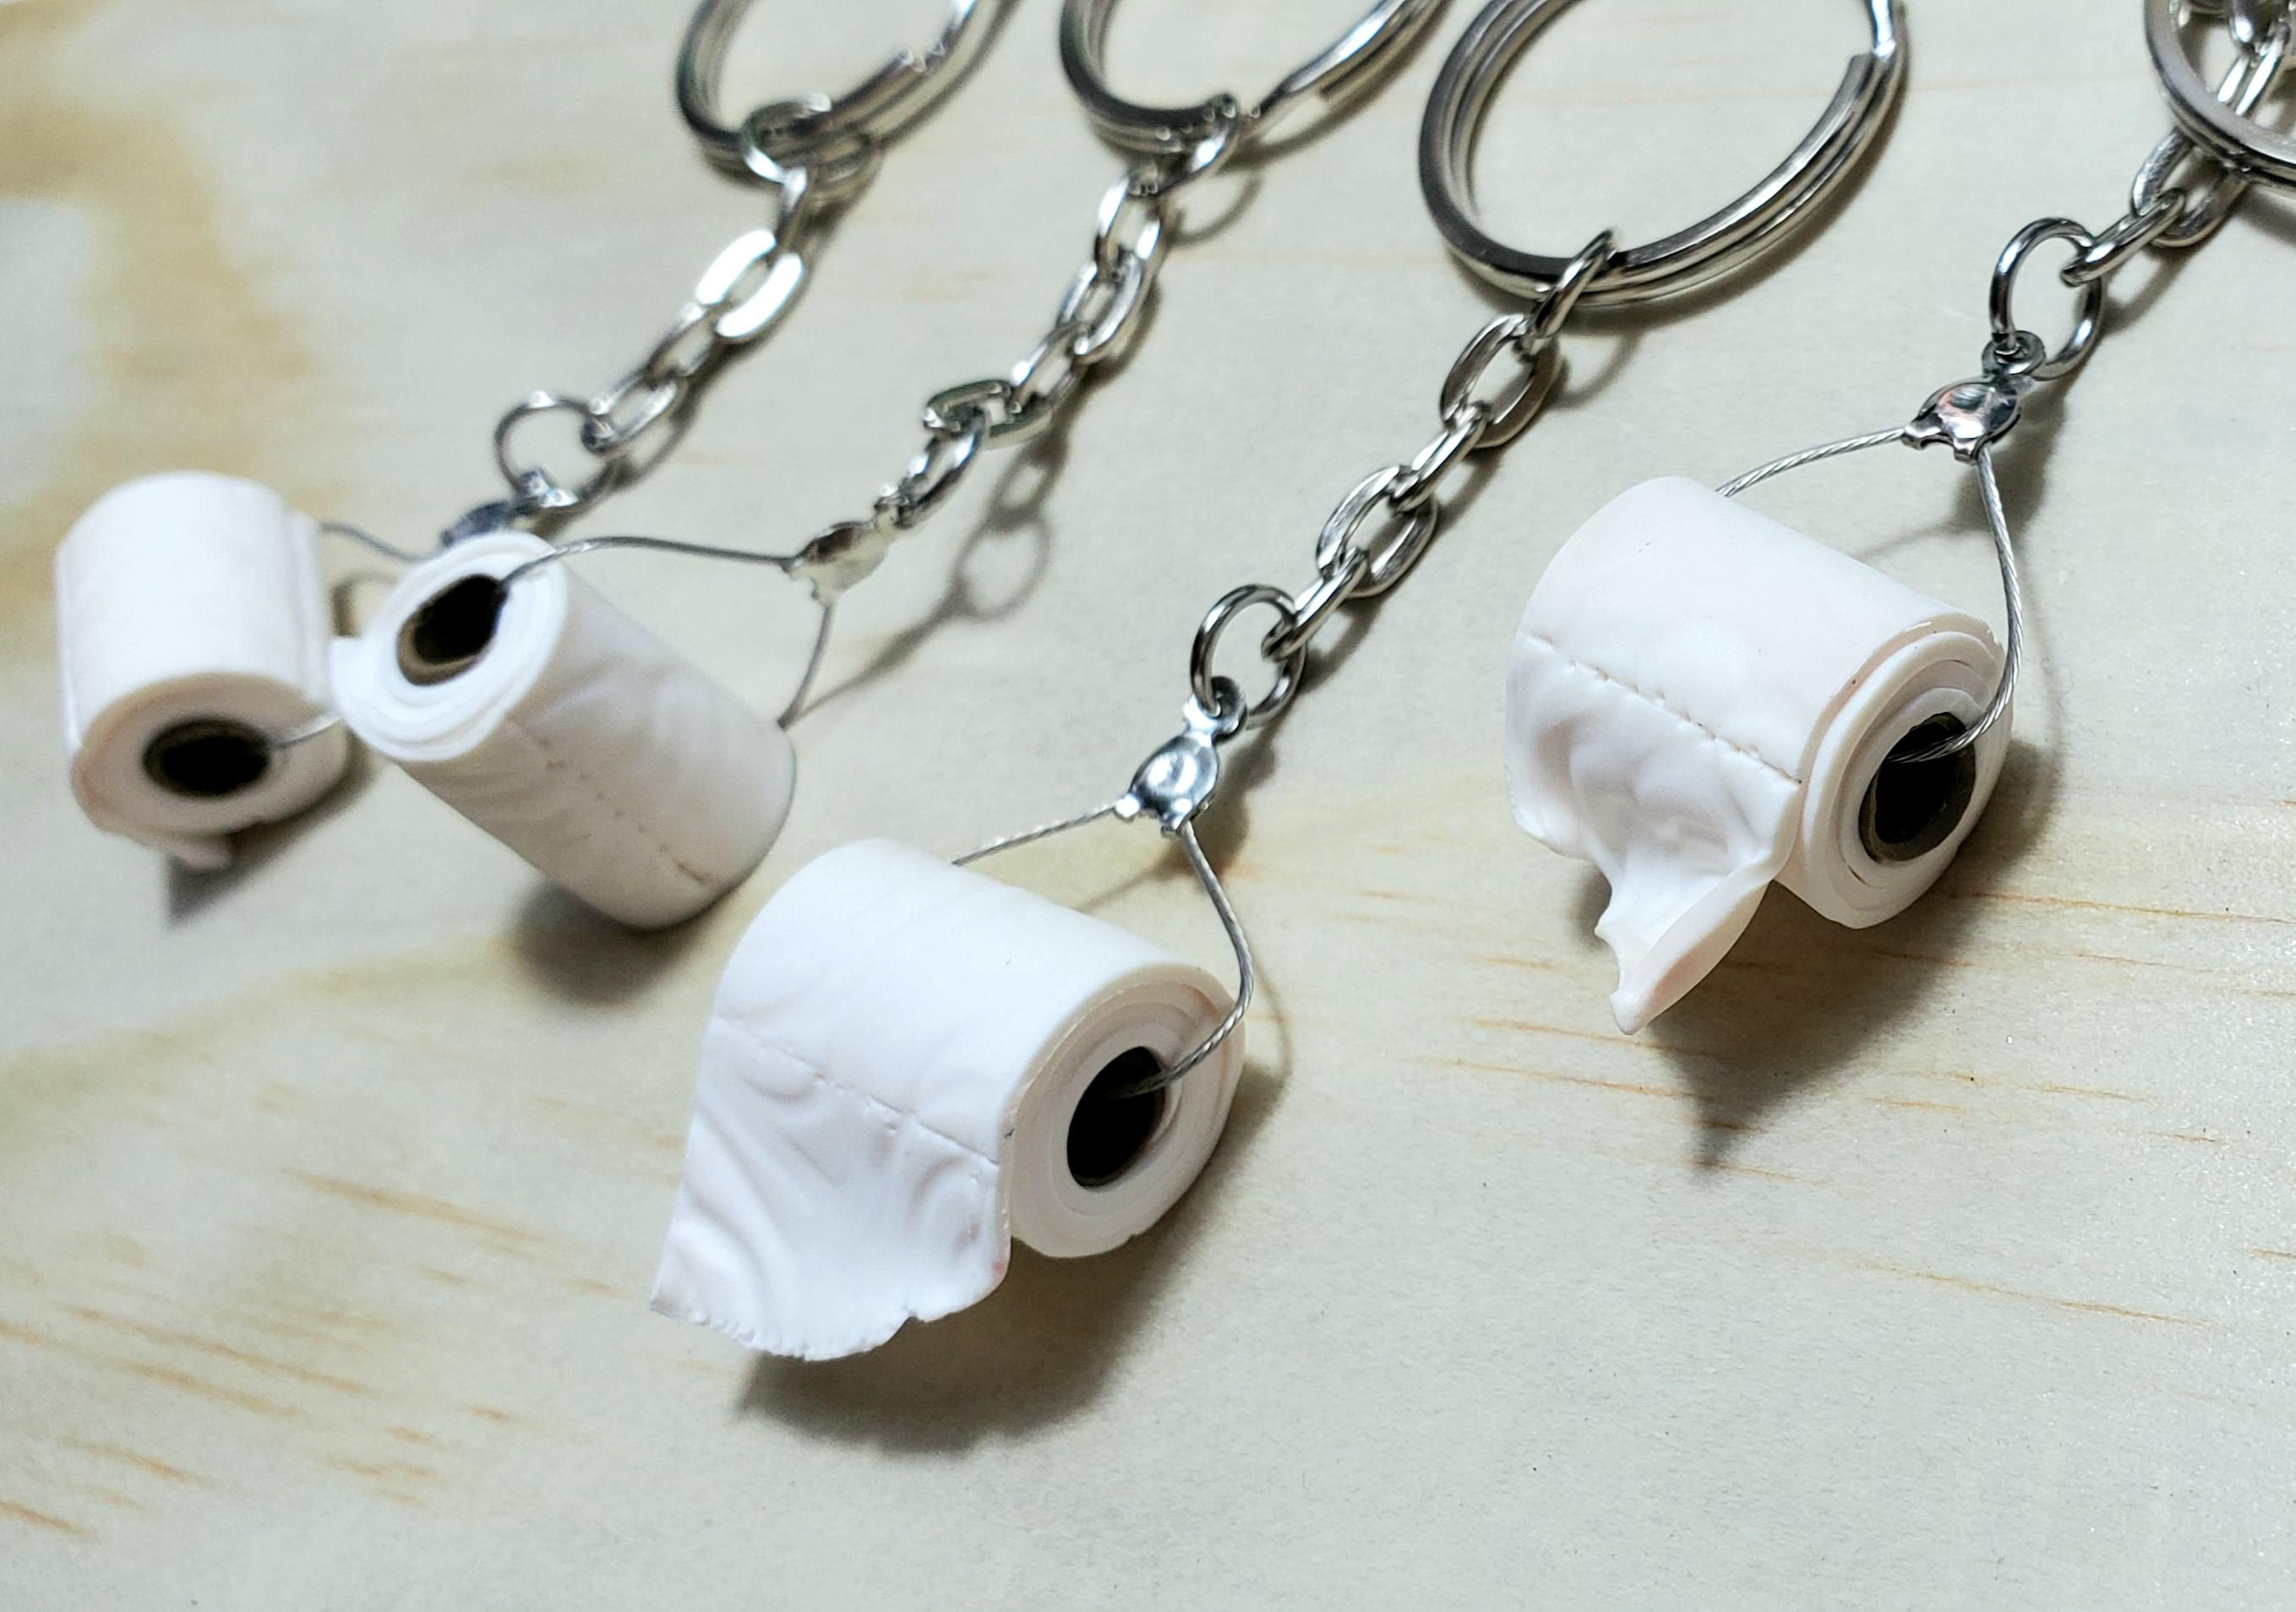 Etsy sent me an email saying that I violated their rules by being offensive. I made these keychains in light of Canada running out of toilet paper!